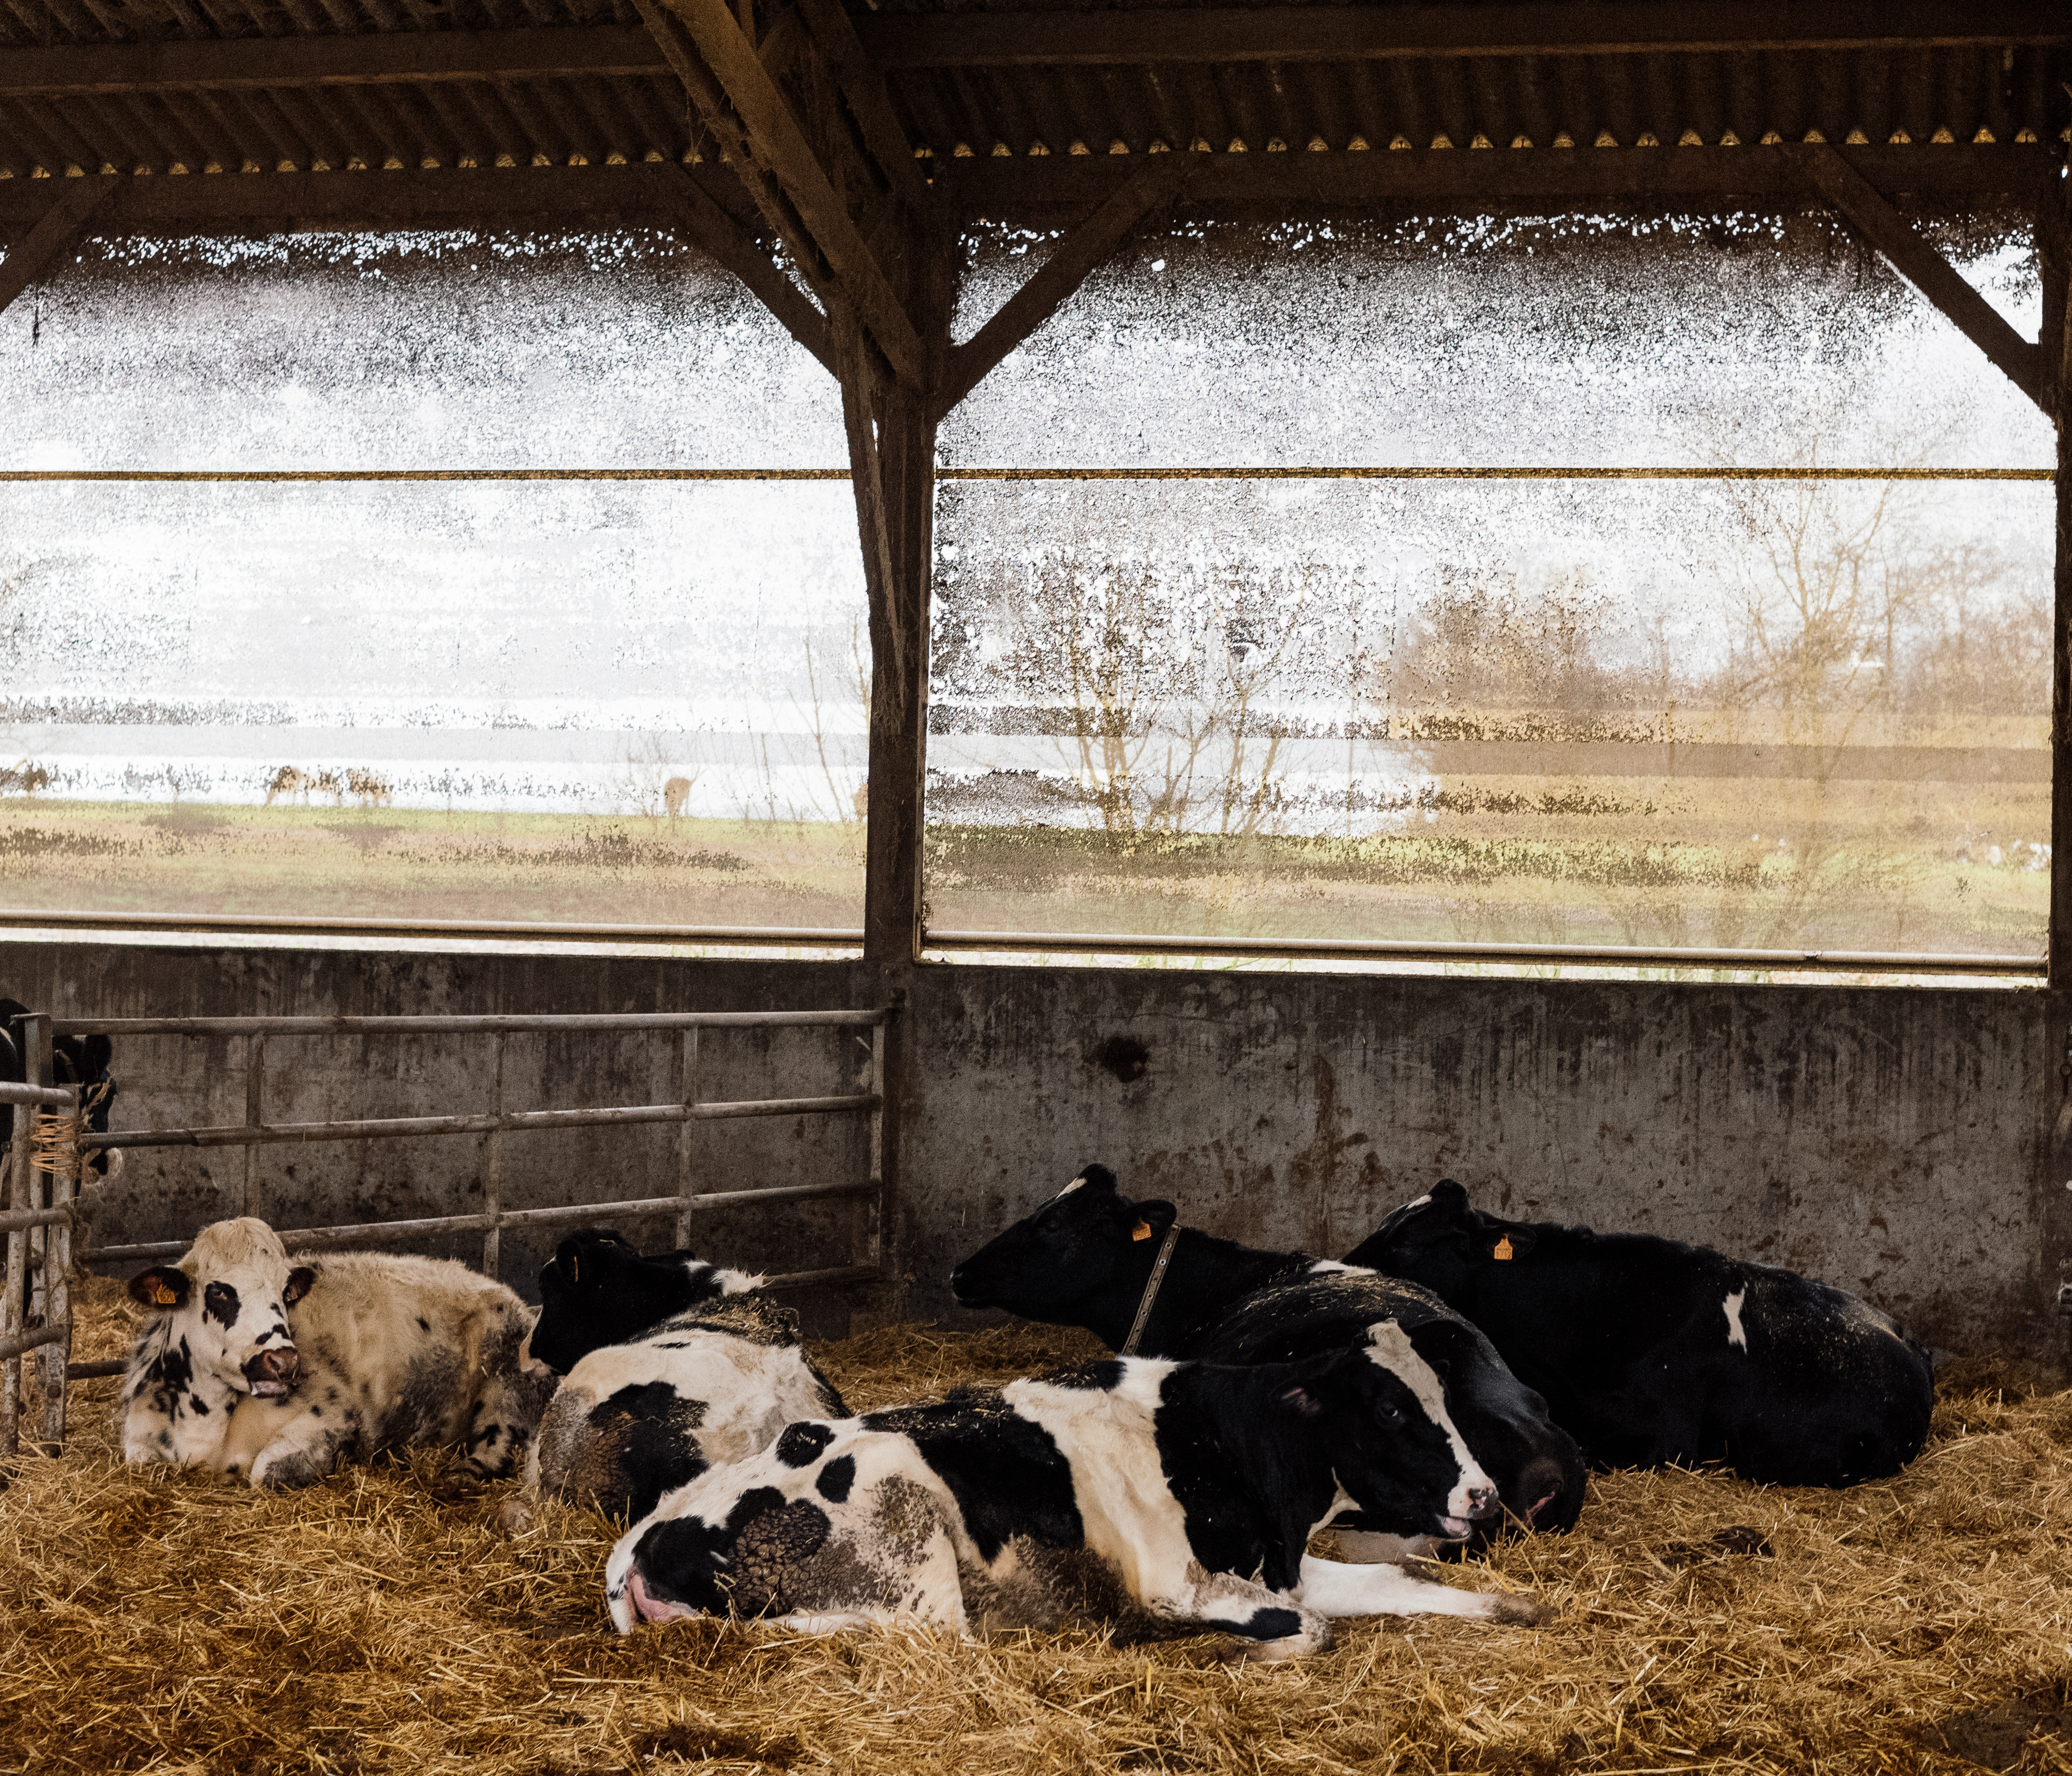 Catherine and Patrice Riauté – black and white cows laying down in the hay inside a stable.